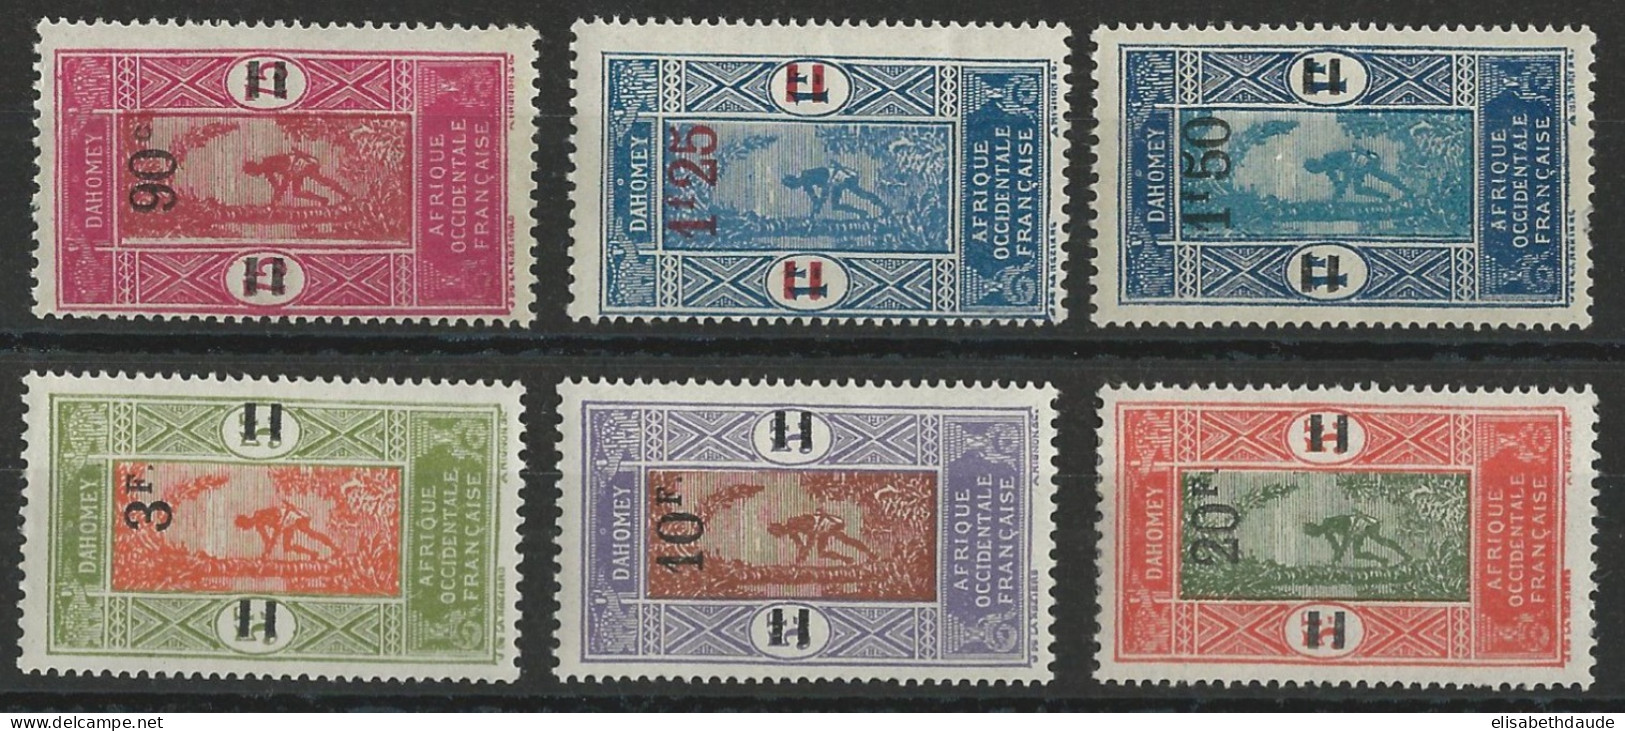 DAHOMEY - 1926/27 - SERIE COMPLETE YVERT N°79/84 * MH - COTE = 42.5 EUR. - CHARNIERES CORRECTES - Unused Stamps